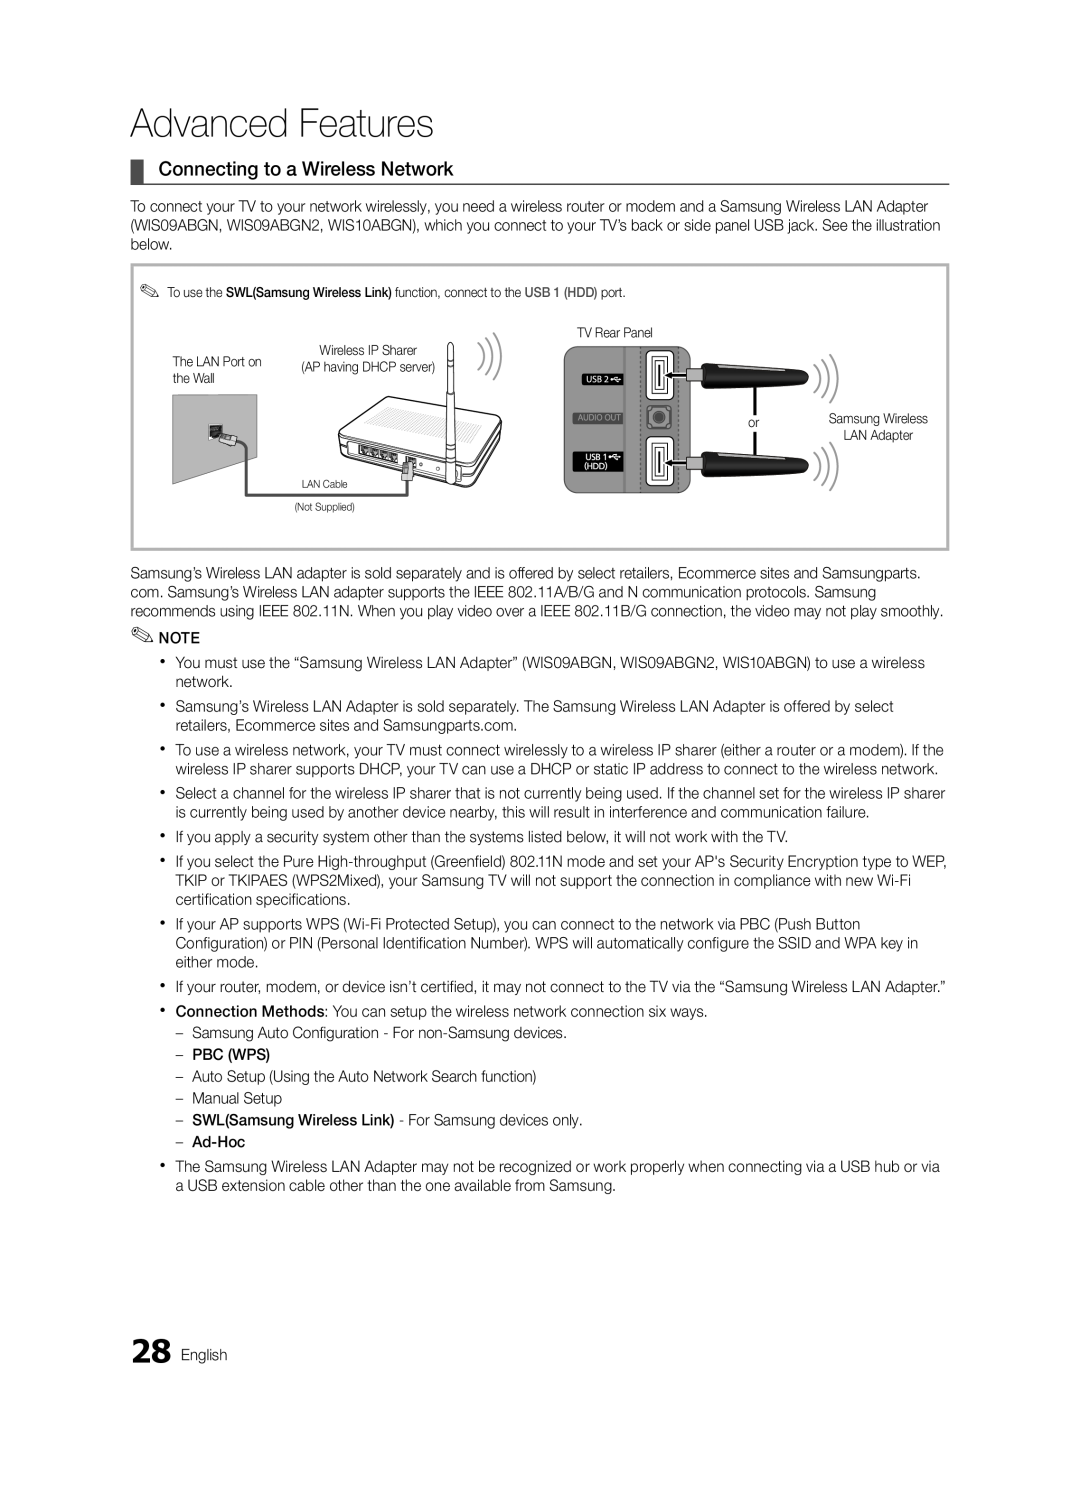 Samsung BN68-02711B-04, UC6500-ZC user manual Connecting to a Wireless Network, Advanced Features 